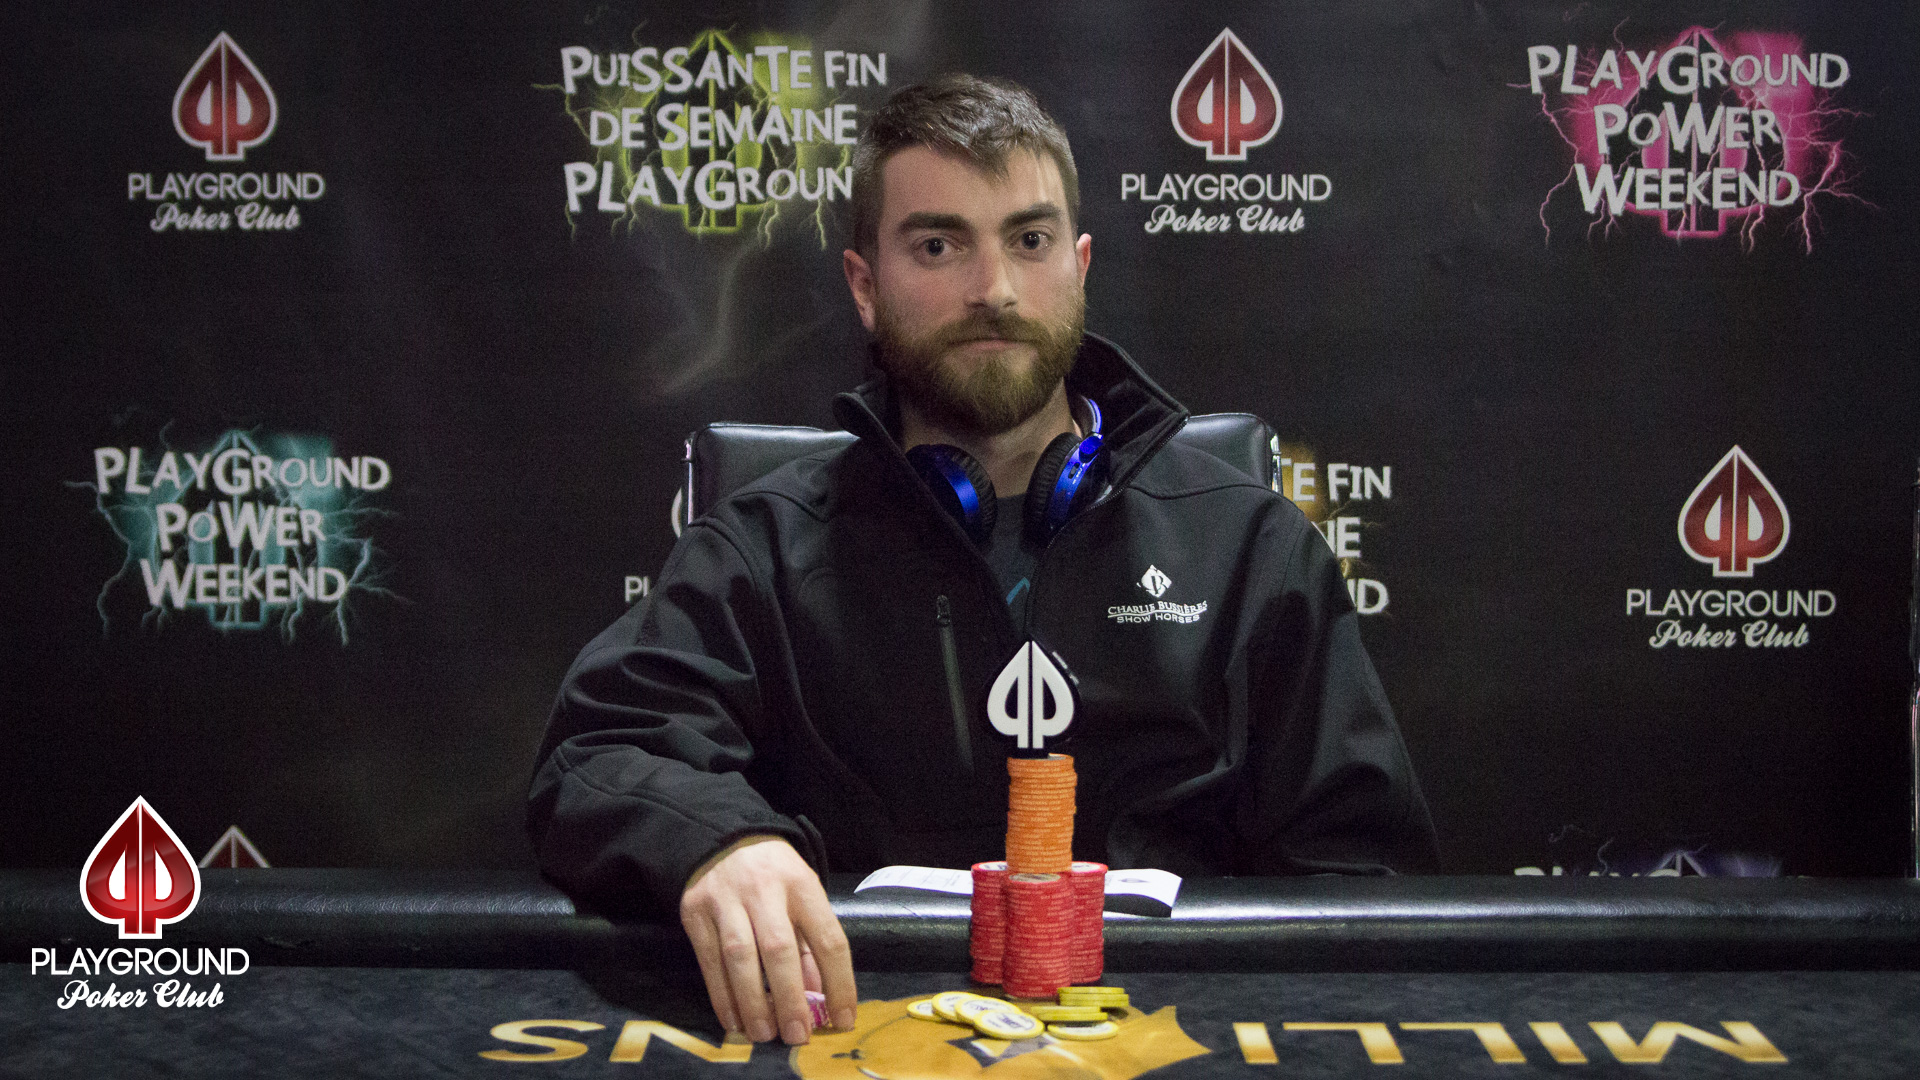 Event #3 Champion: Jonathan Bussieres